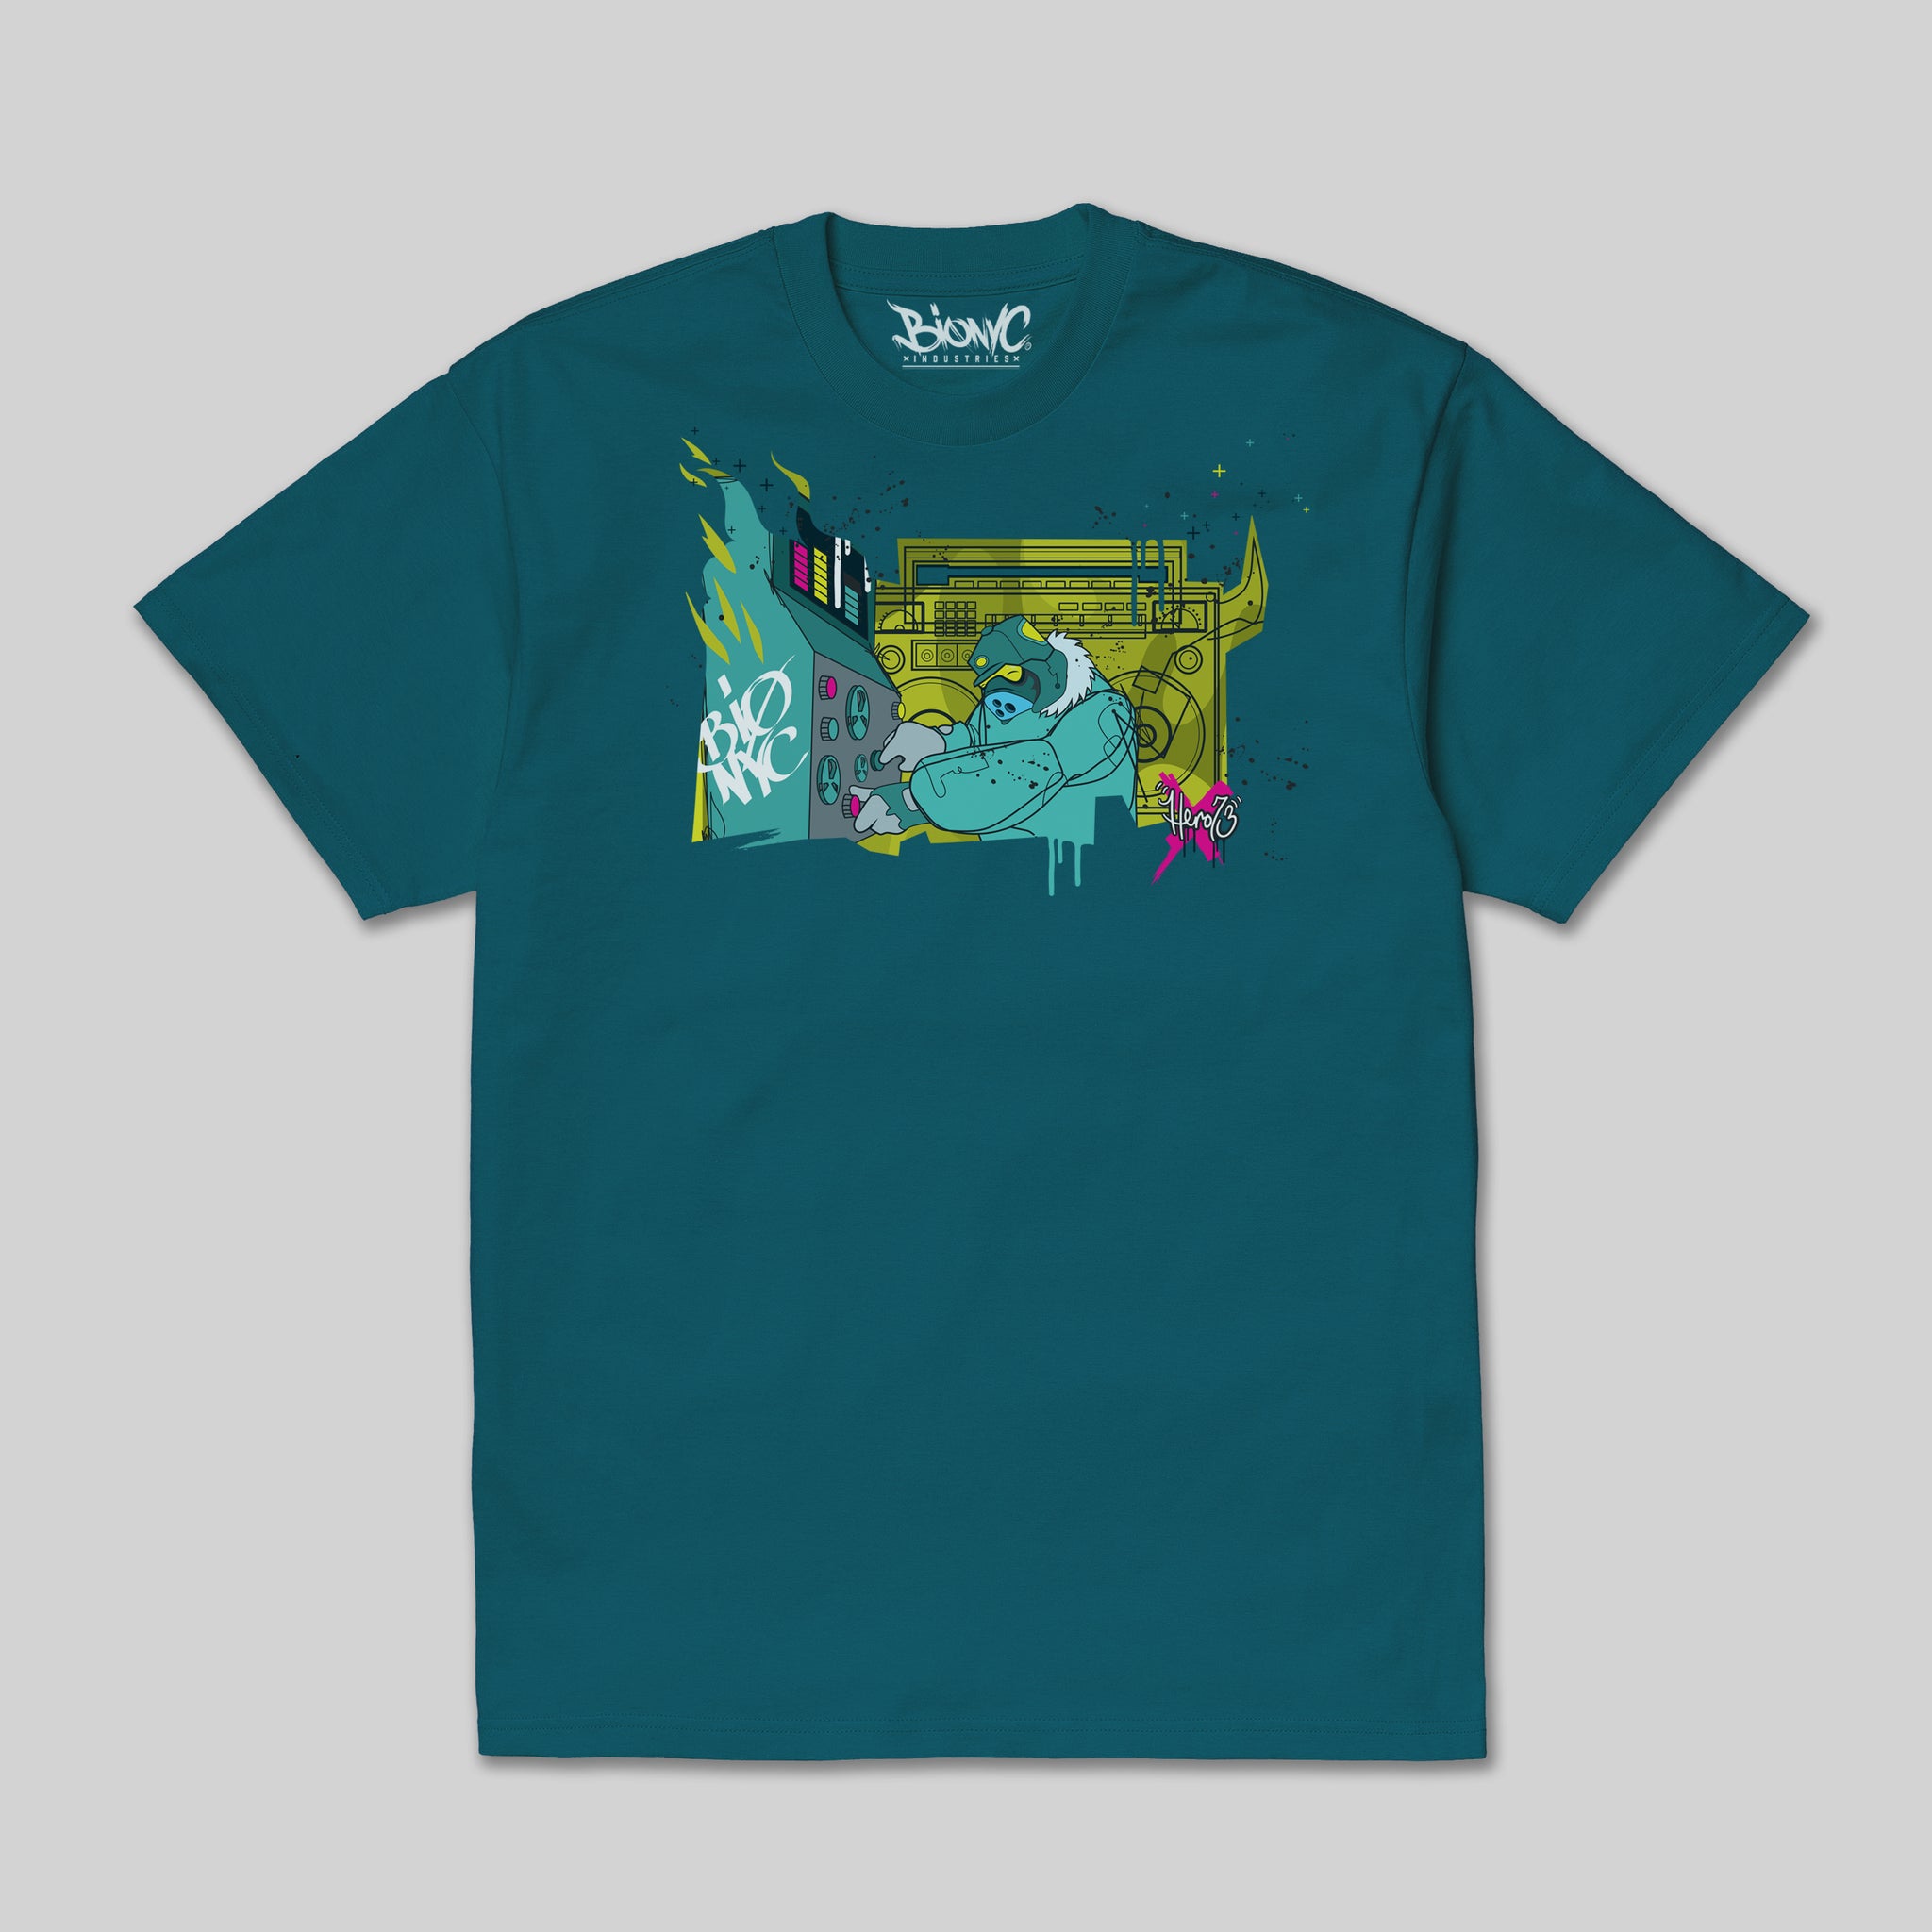 Vibe Controller - Youth T-Shirt